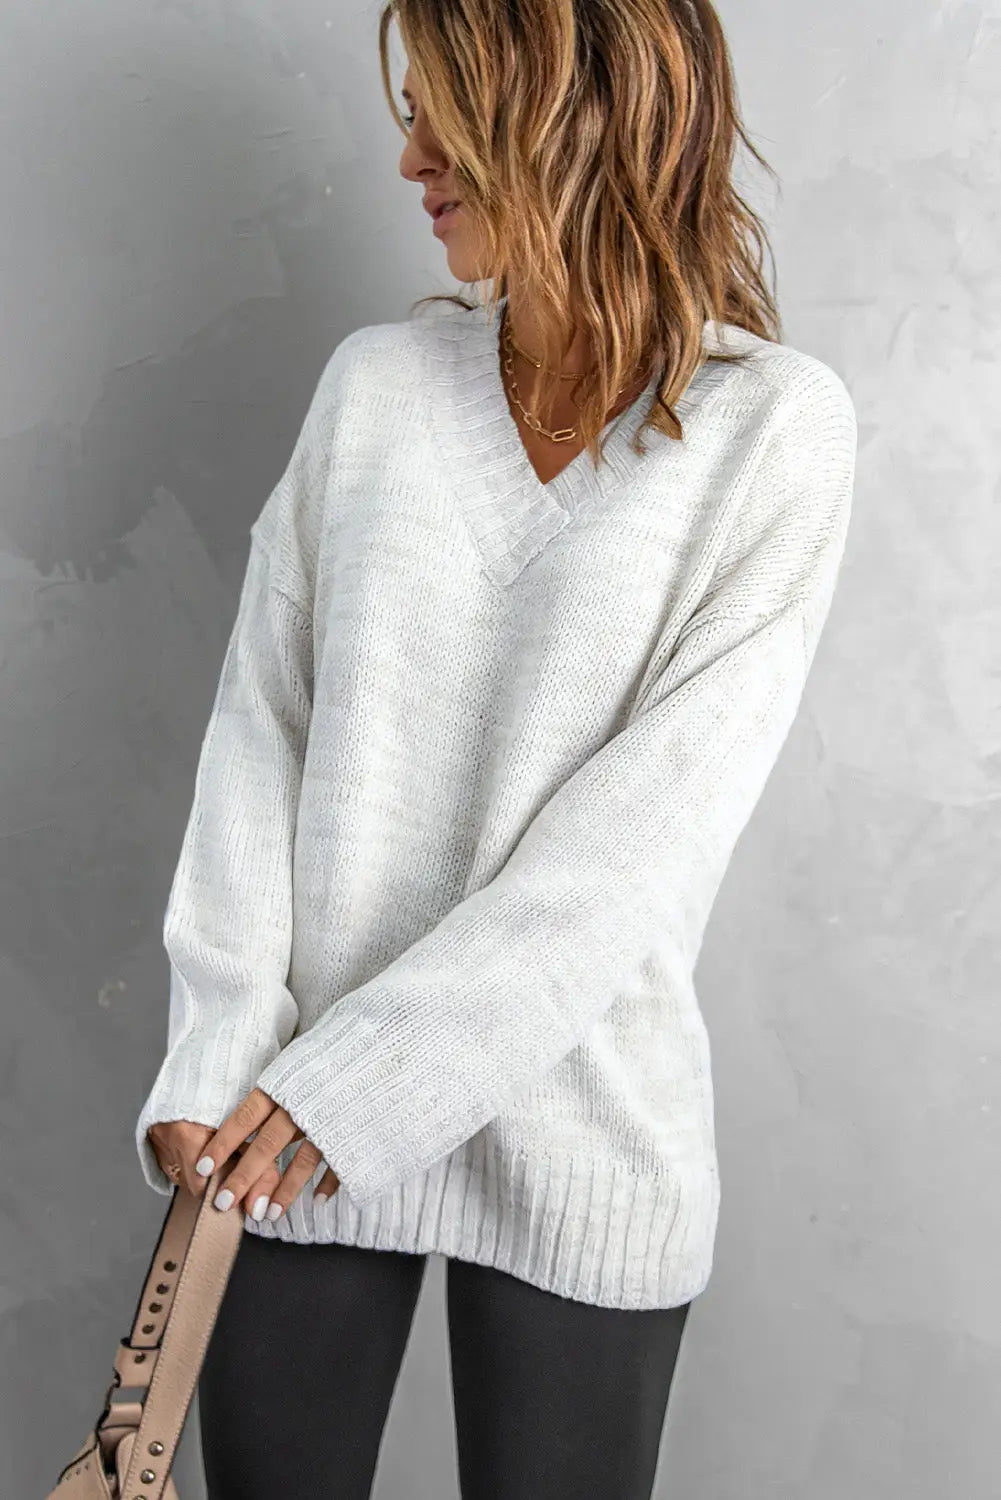 White v neck drop shoulder knitted sweater - sweaters & cardigans